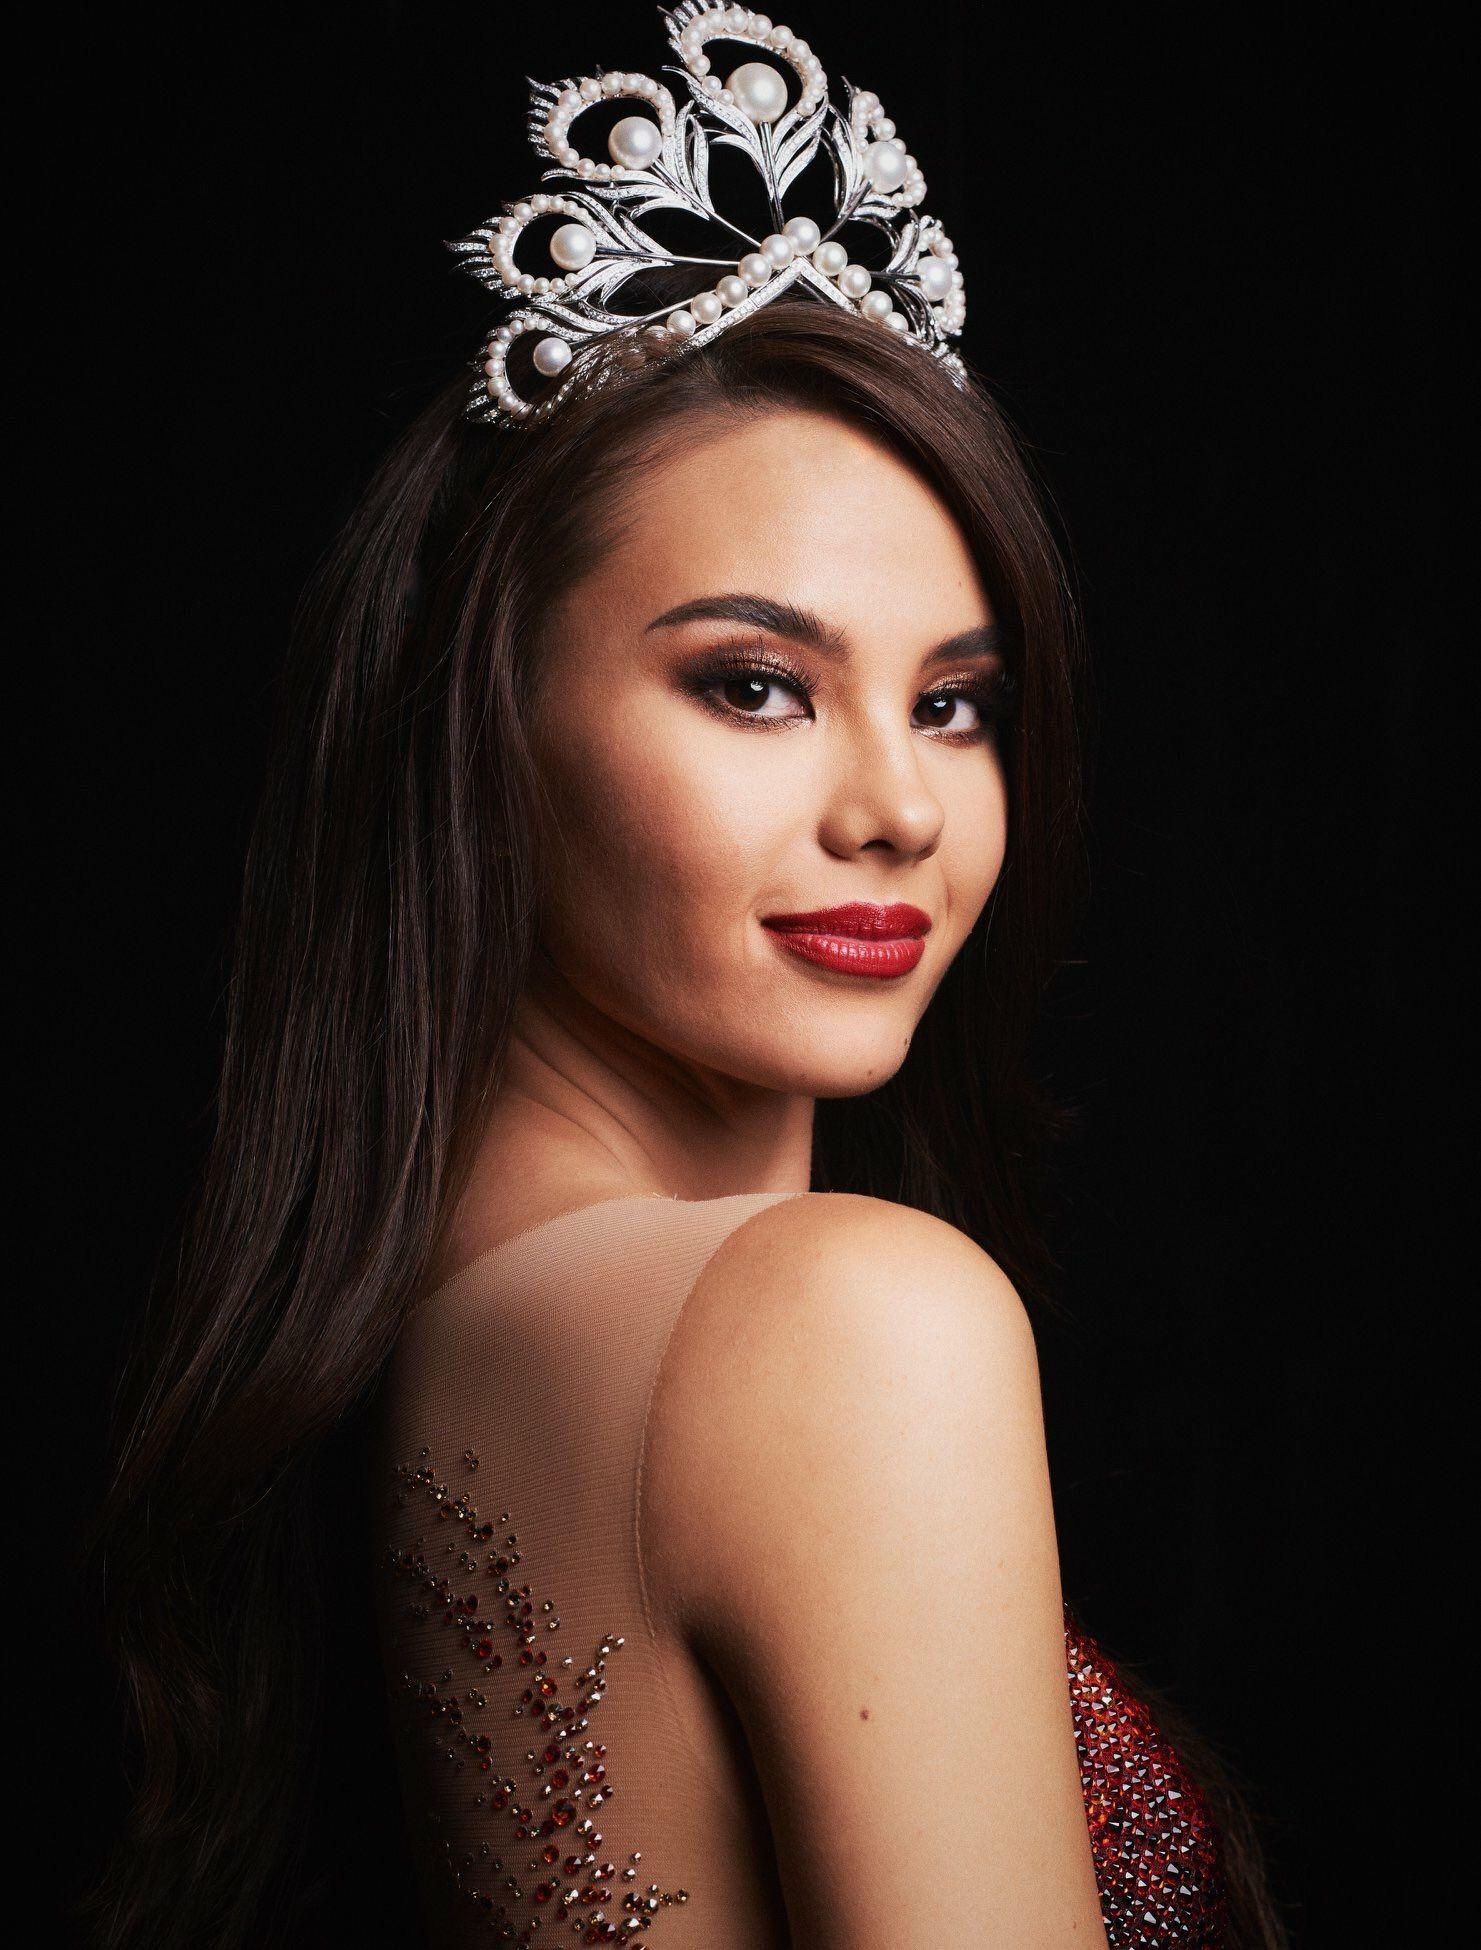 Miss Universe Catriona Gray (ctto). Beauty pageant